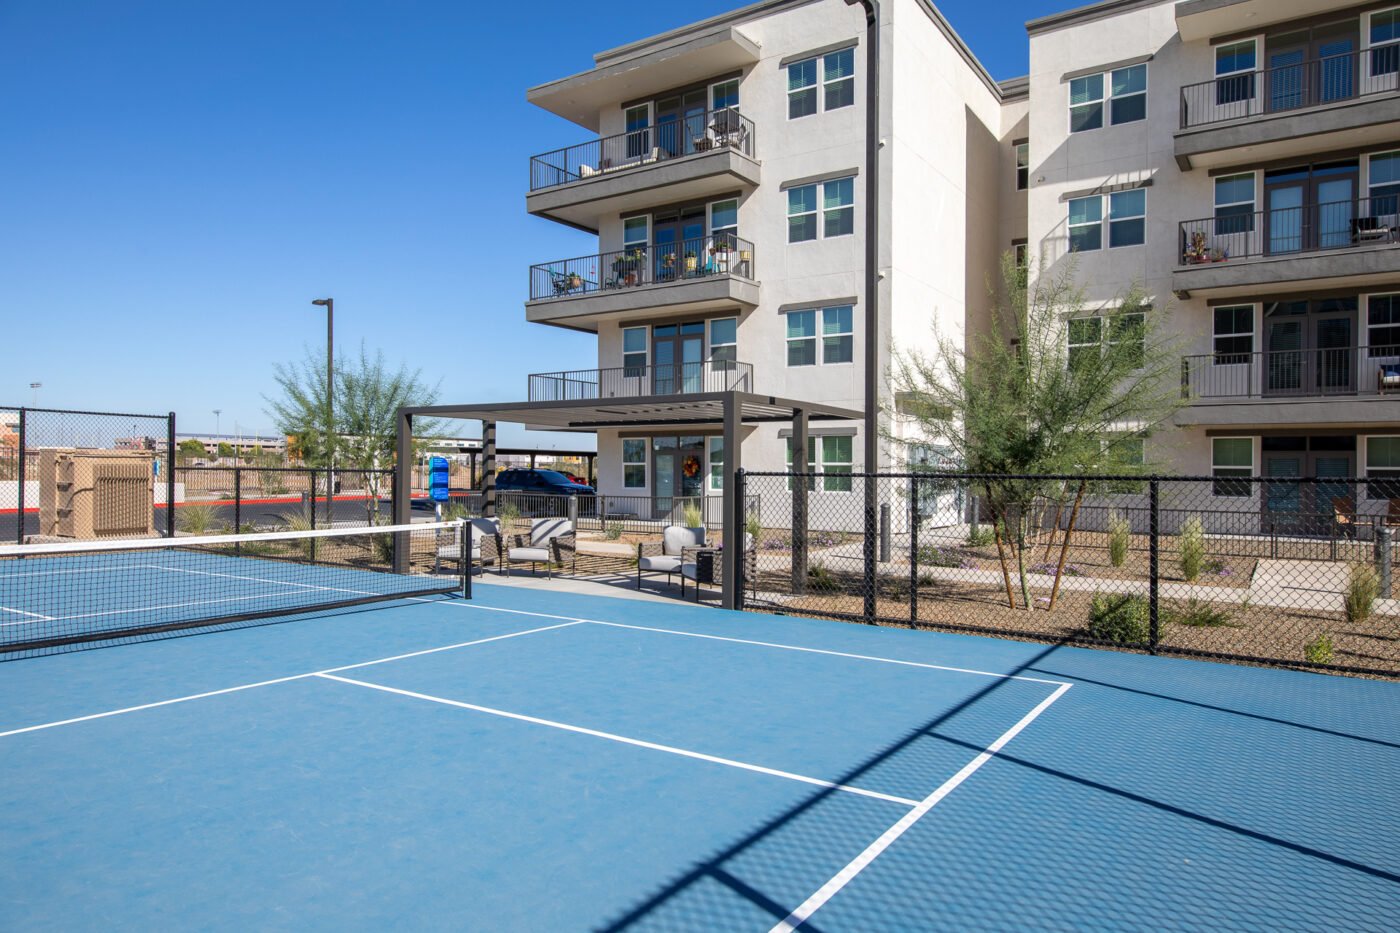 Outdoor Amenity Spaces - Pickleball